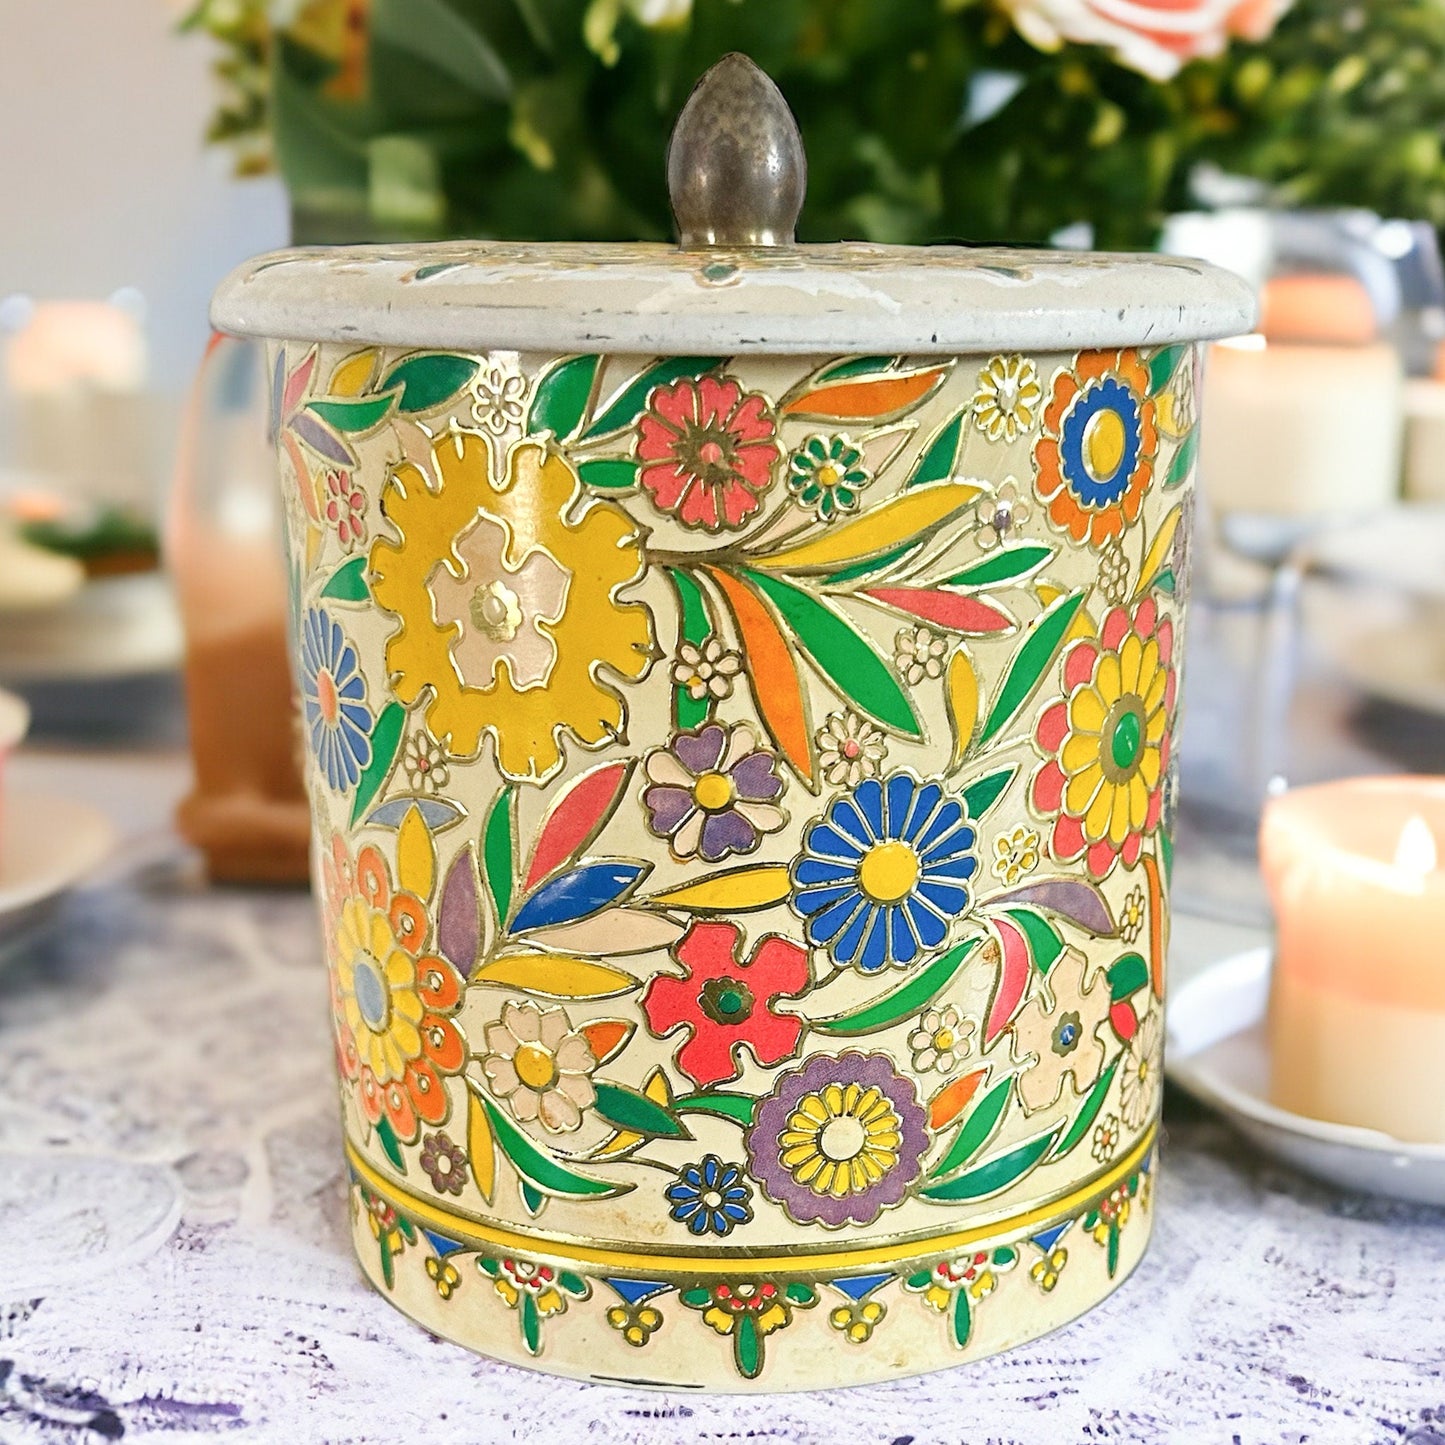 Scented Soy Candle, Vintage Tins, Gift For Mom, Spring Decor